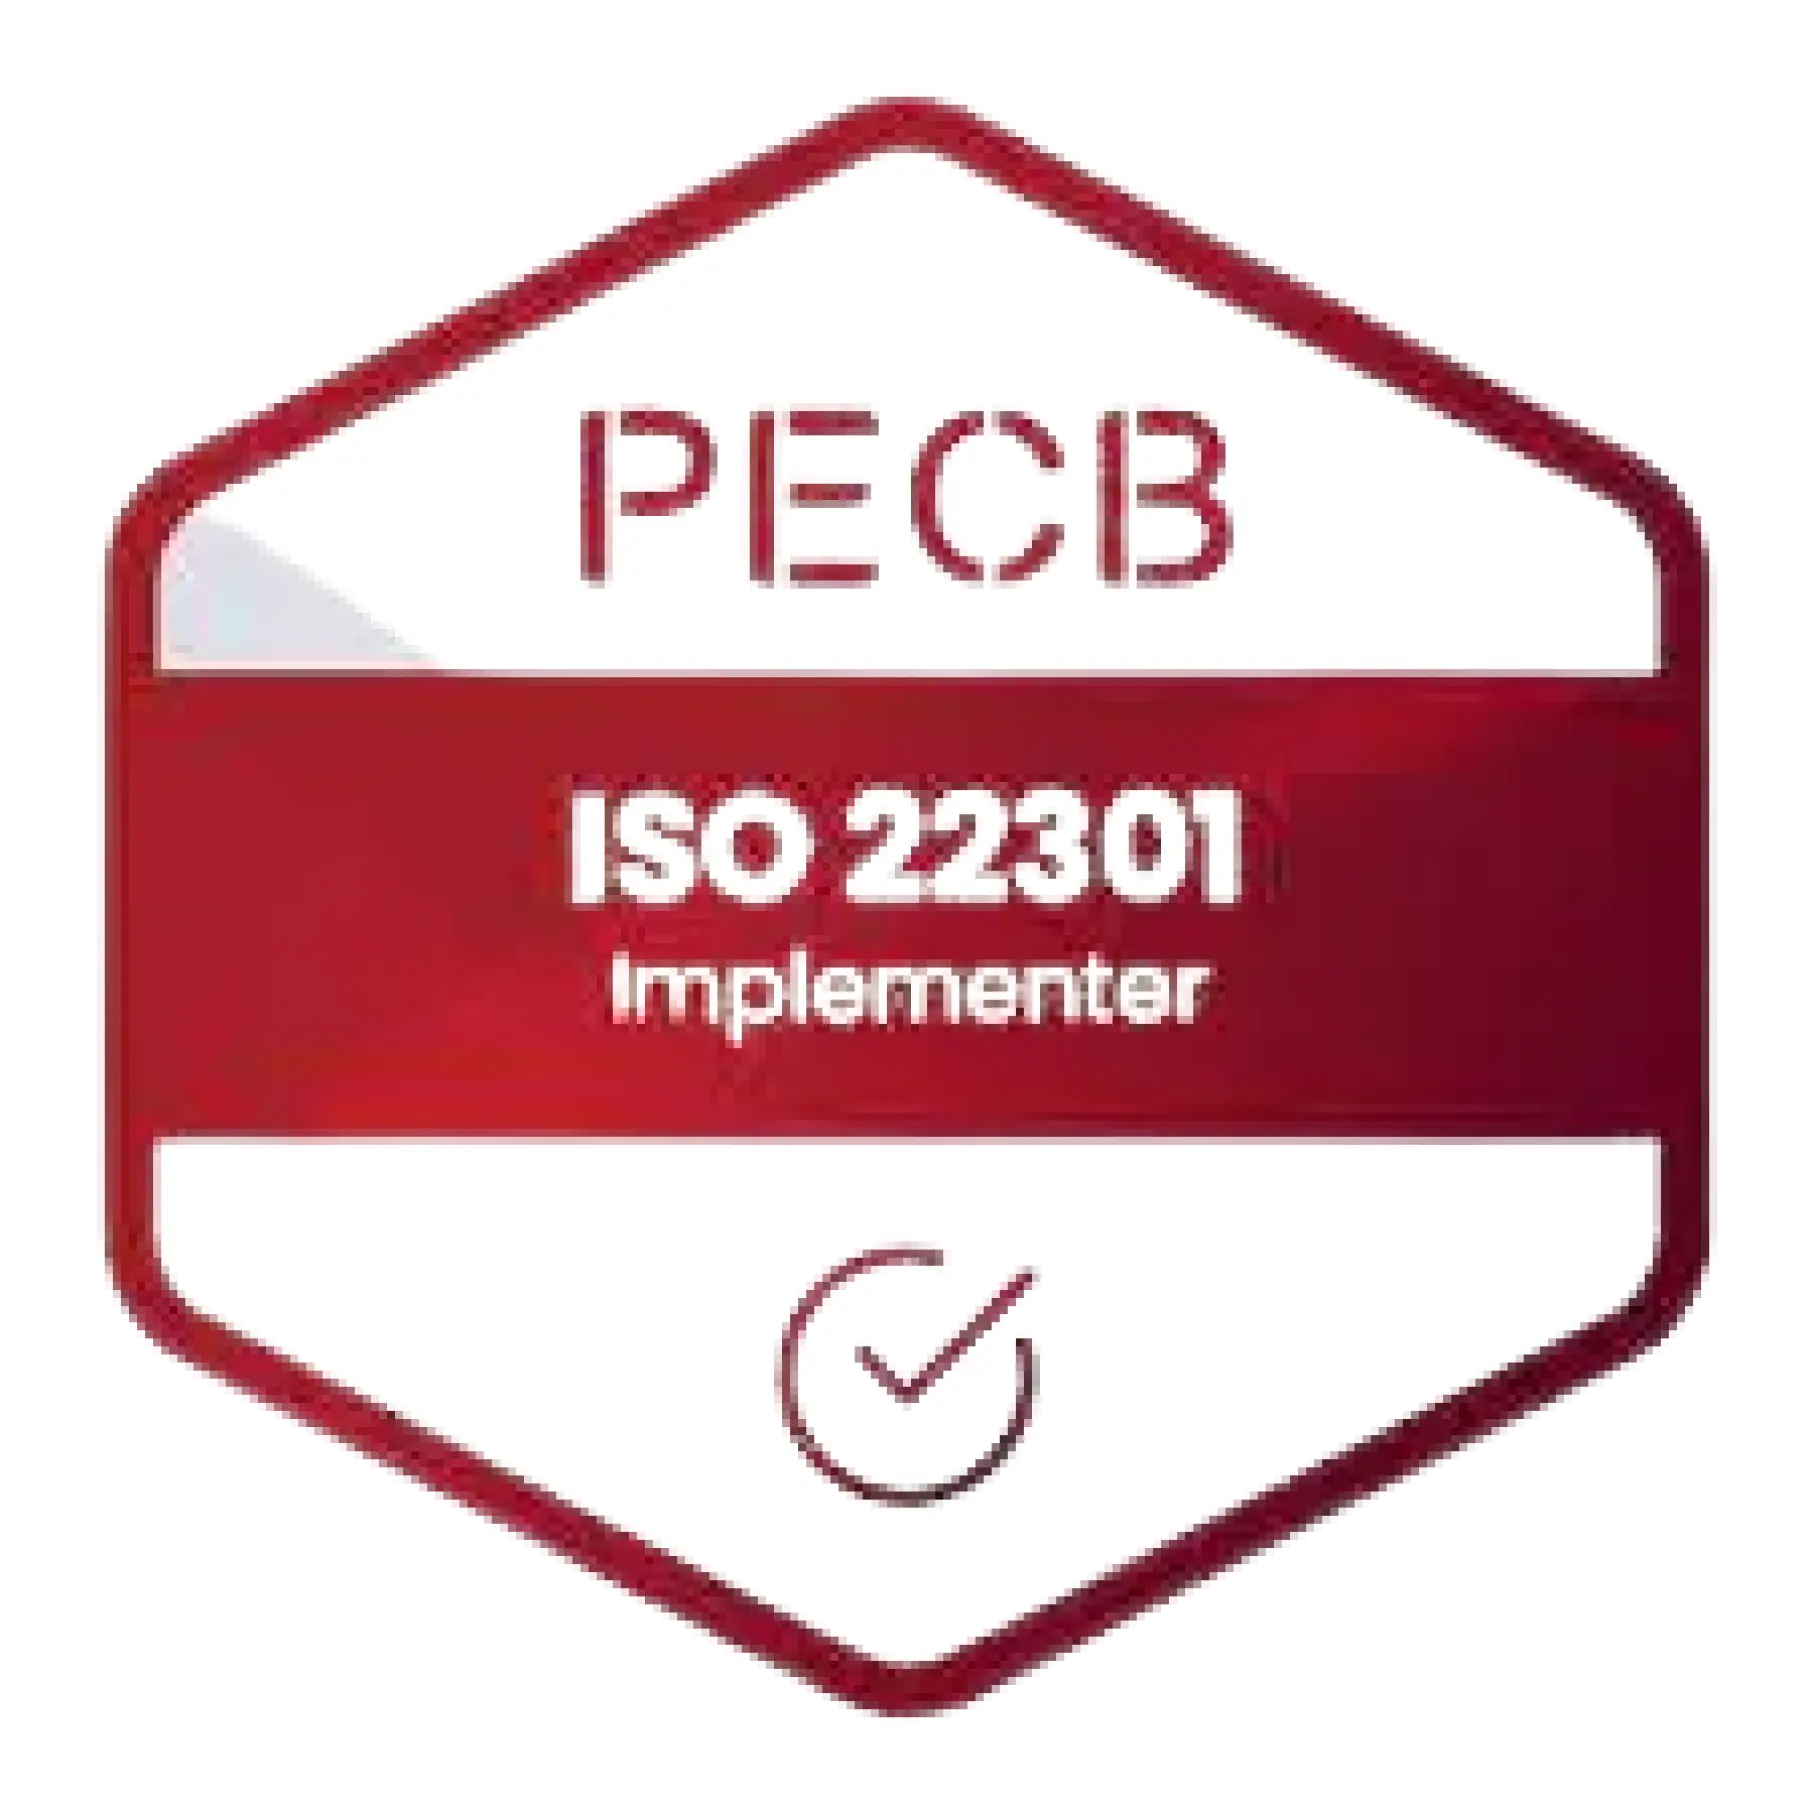 Certified ISO 22301 Lead Implementer badge achieved after attending the ISO 22301 Lead Implementer Course and Exam